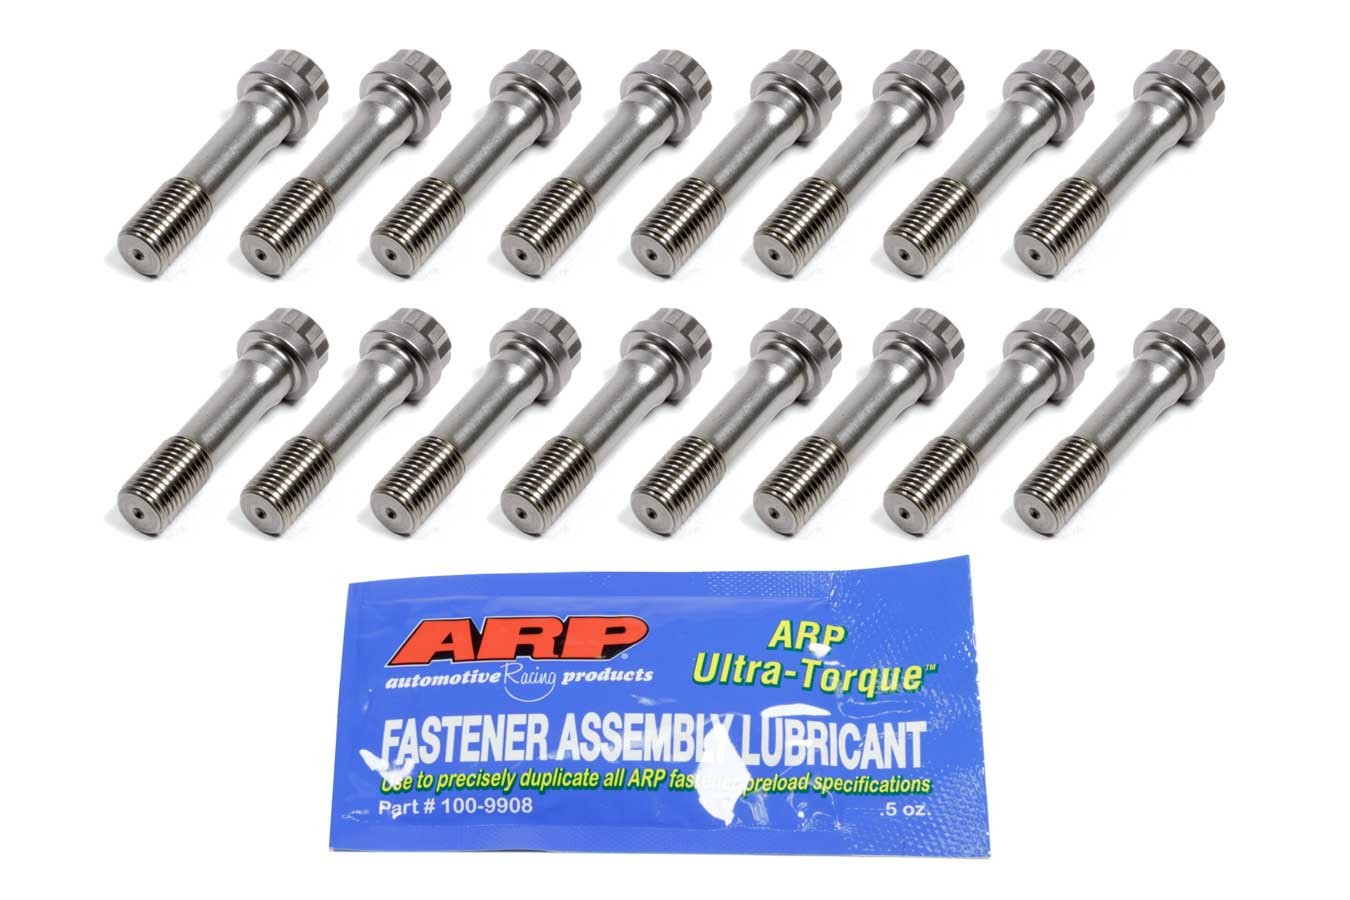 Eagle 14020 Connecting Rod Bolt Kit, 7/16 in Bolt, 1.750 in Long, 12 Point Head, ARPL19, Set of 16